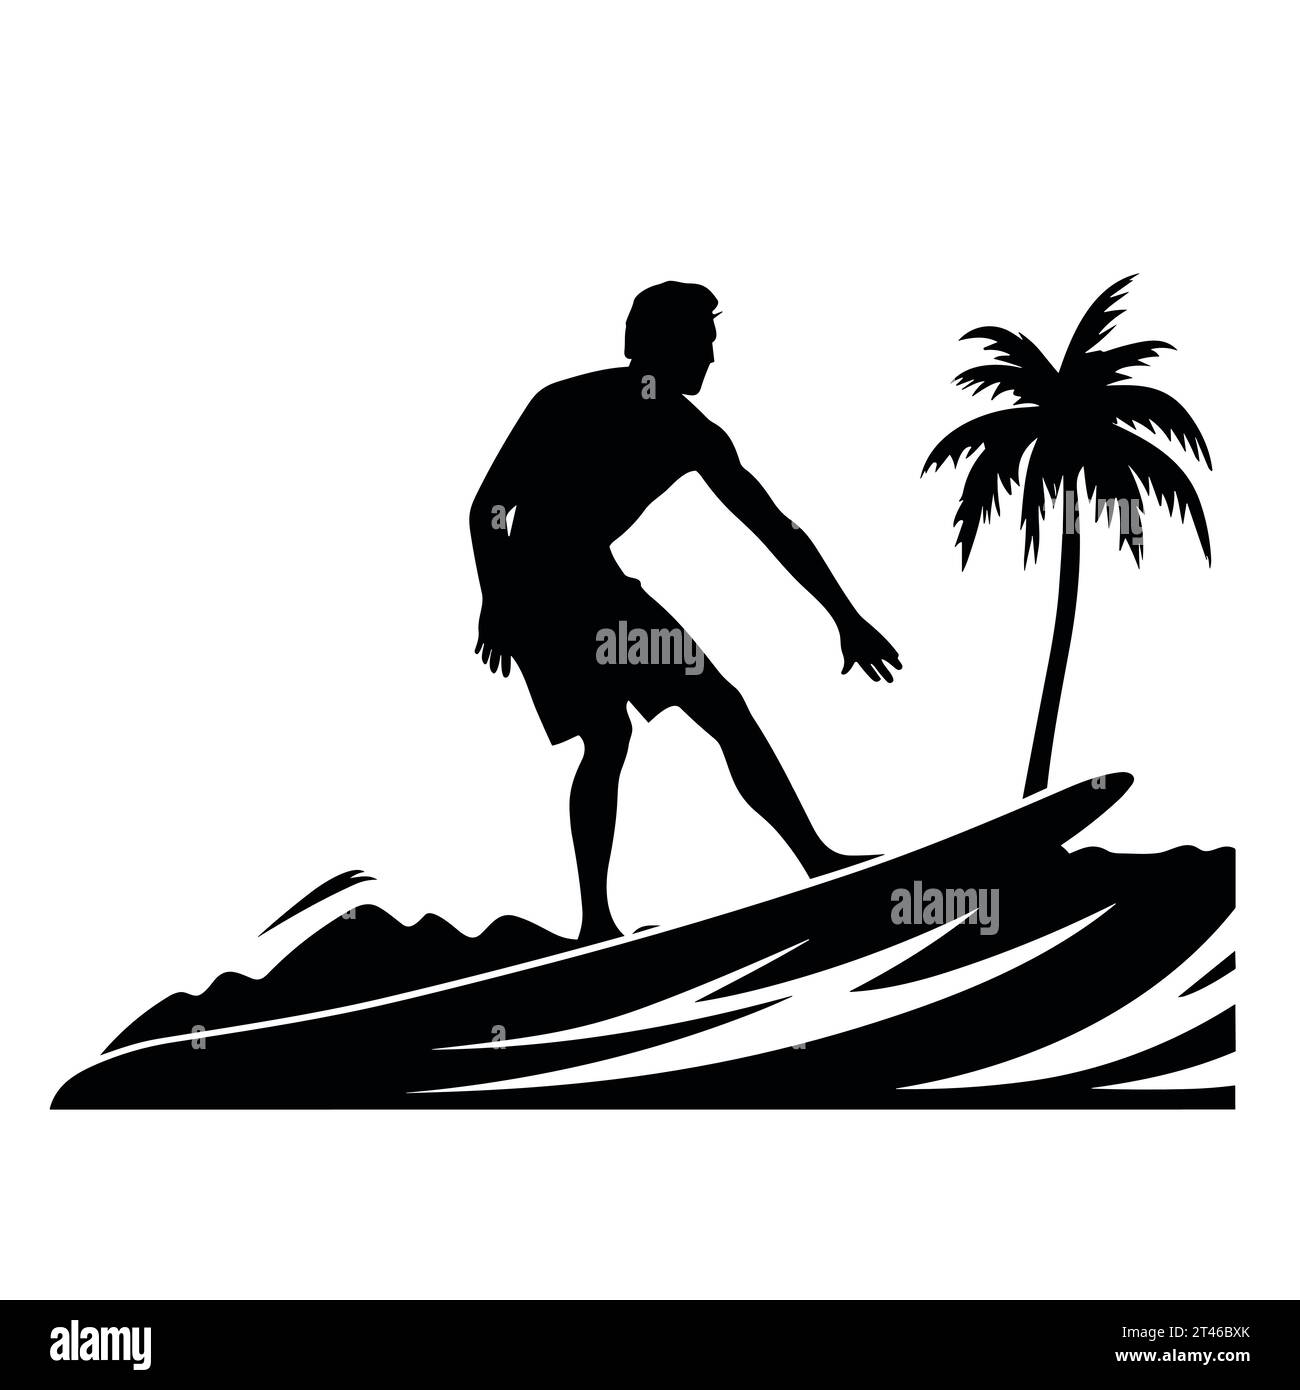 Surfer silhouette. Surfer black icon on white background Stock Vector ...